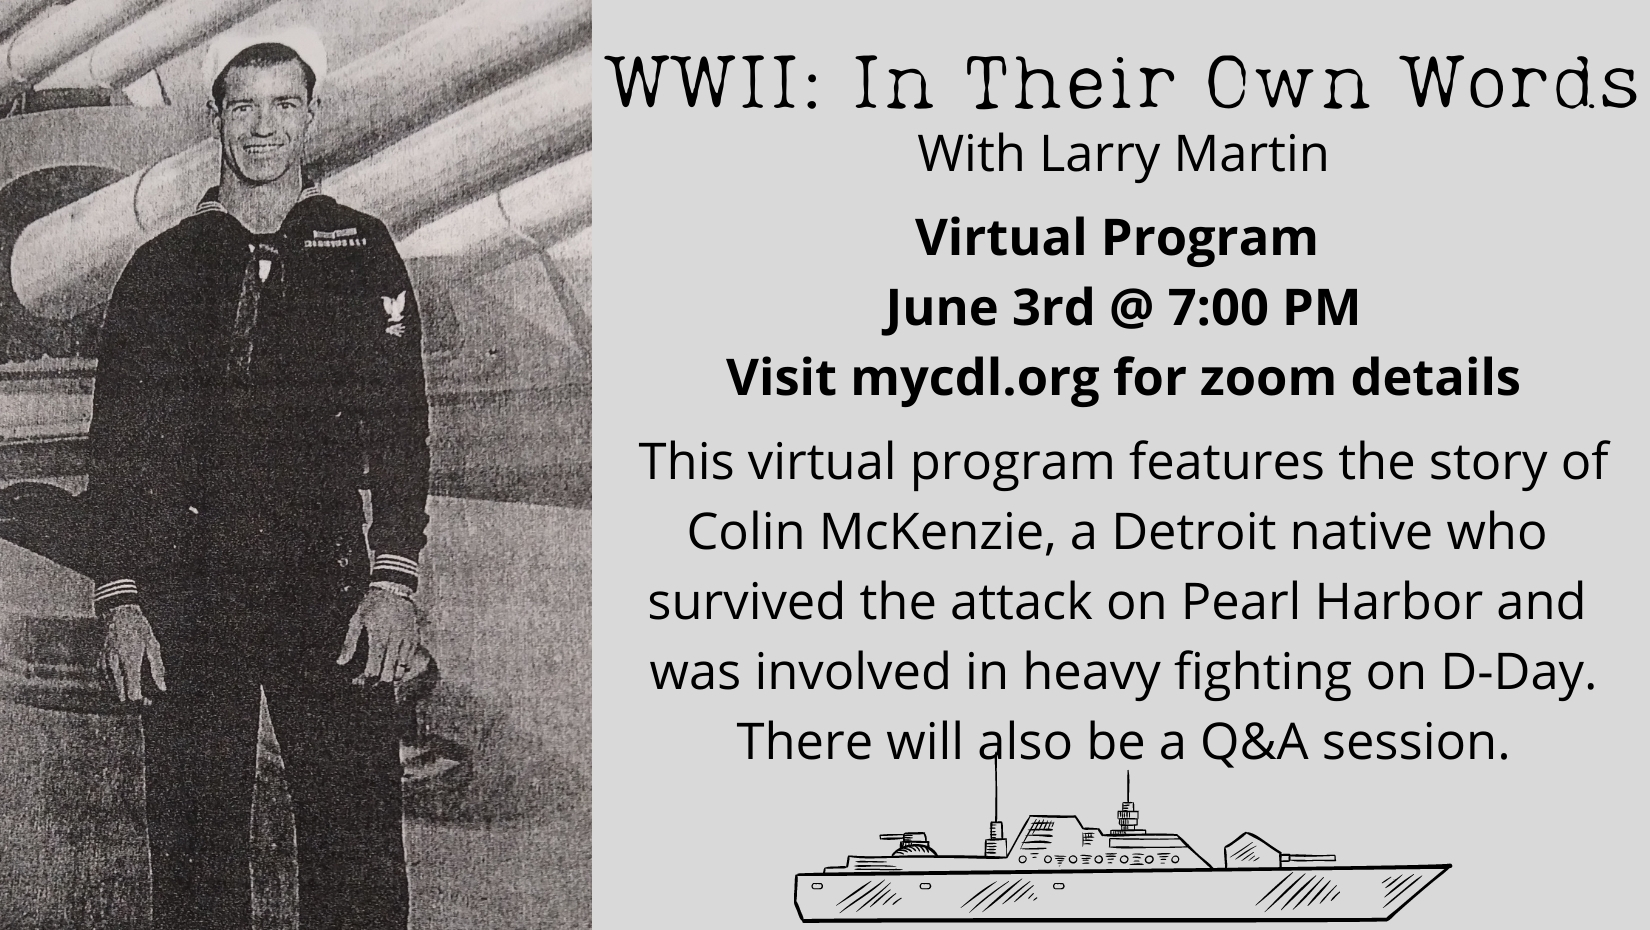 WWII soldier and program details